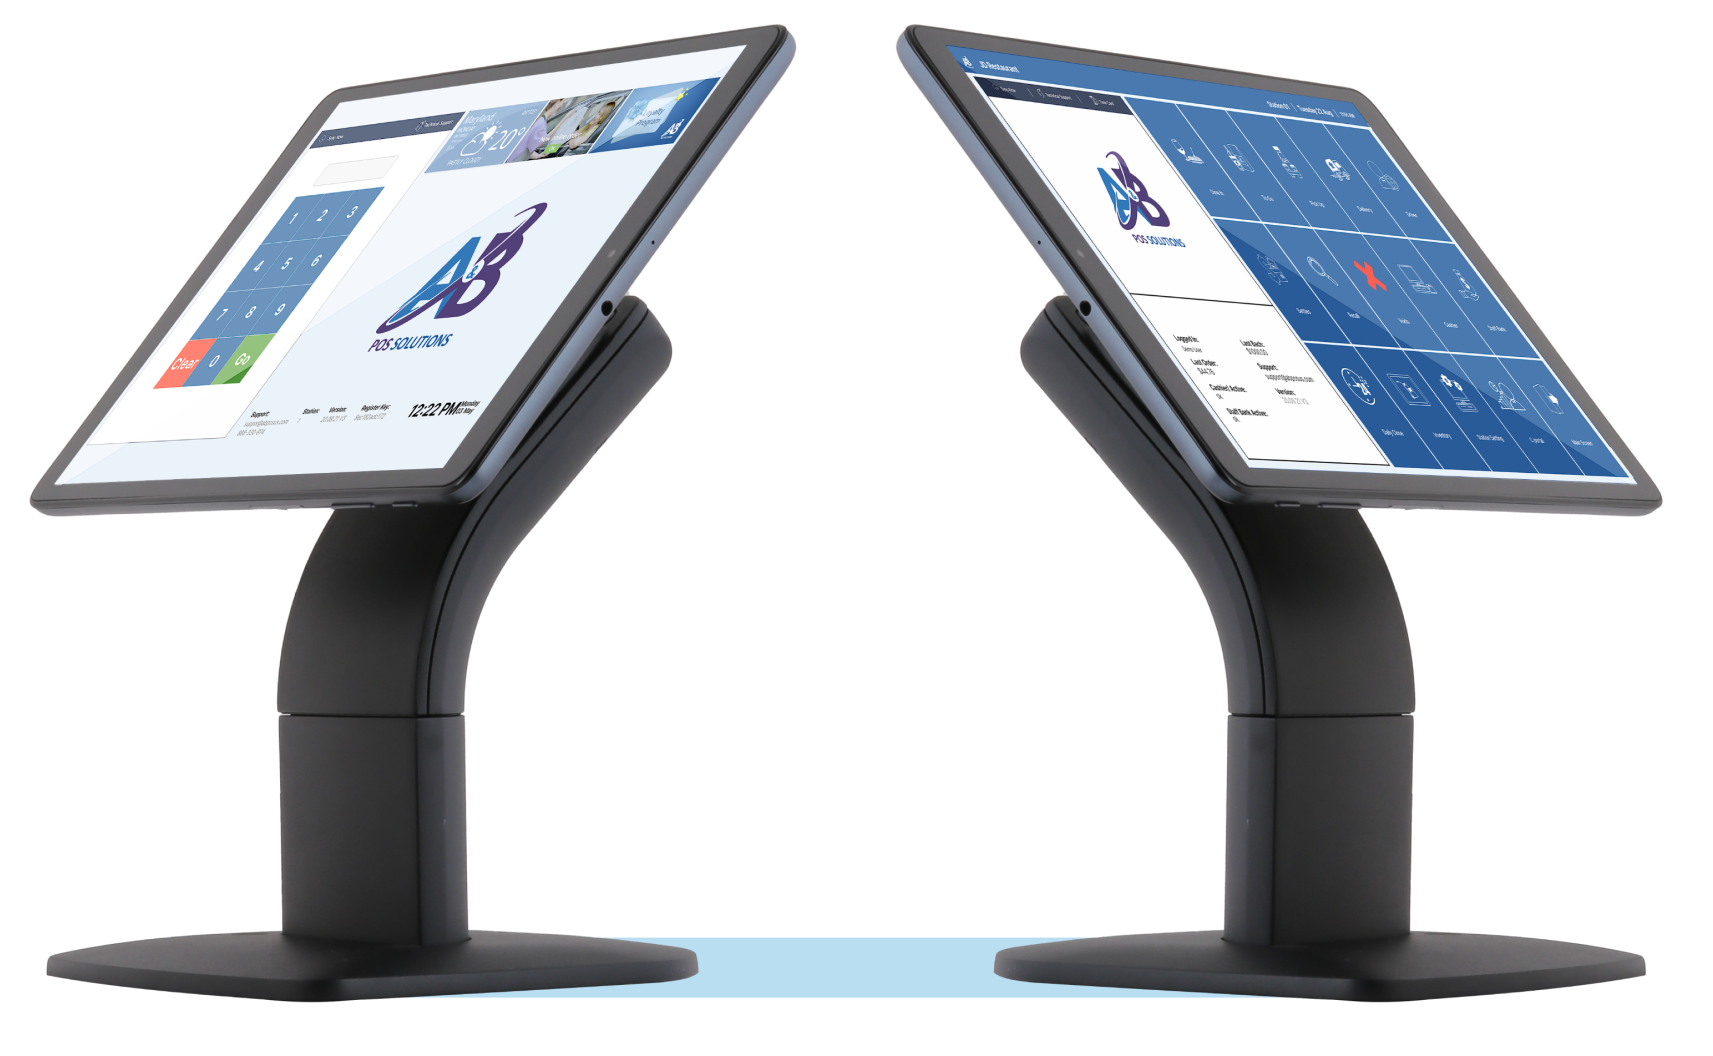 AB POS Software - Point-of-sale combines powerful cloud-based software, payment processing, and beautiful hardware, all built for the restaurant industry